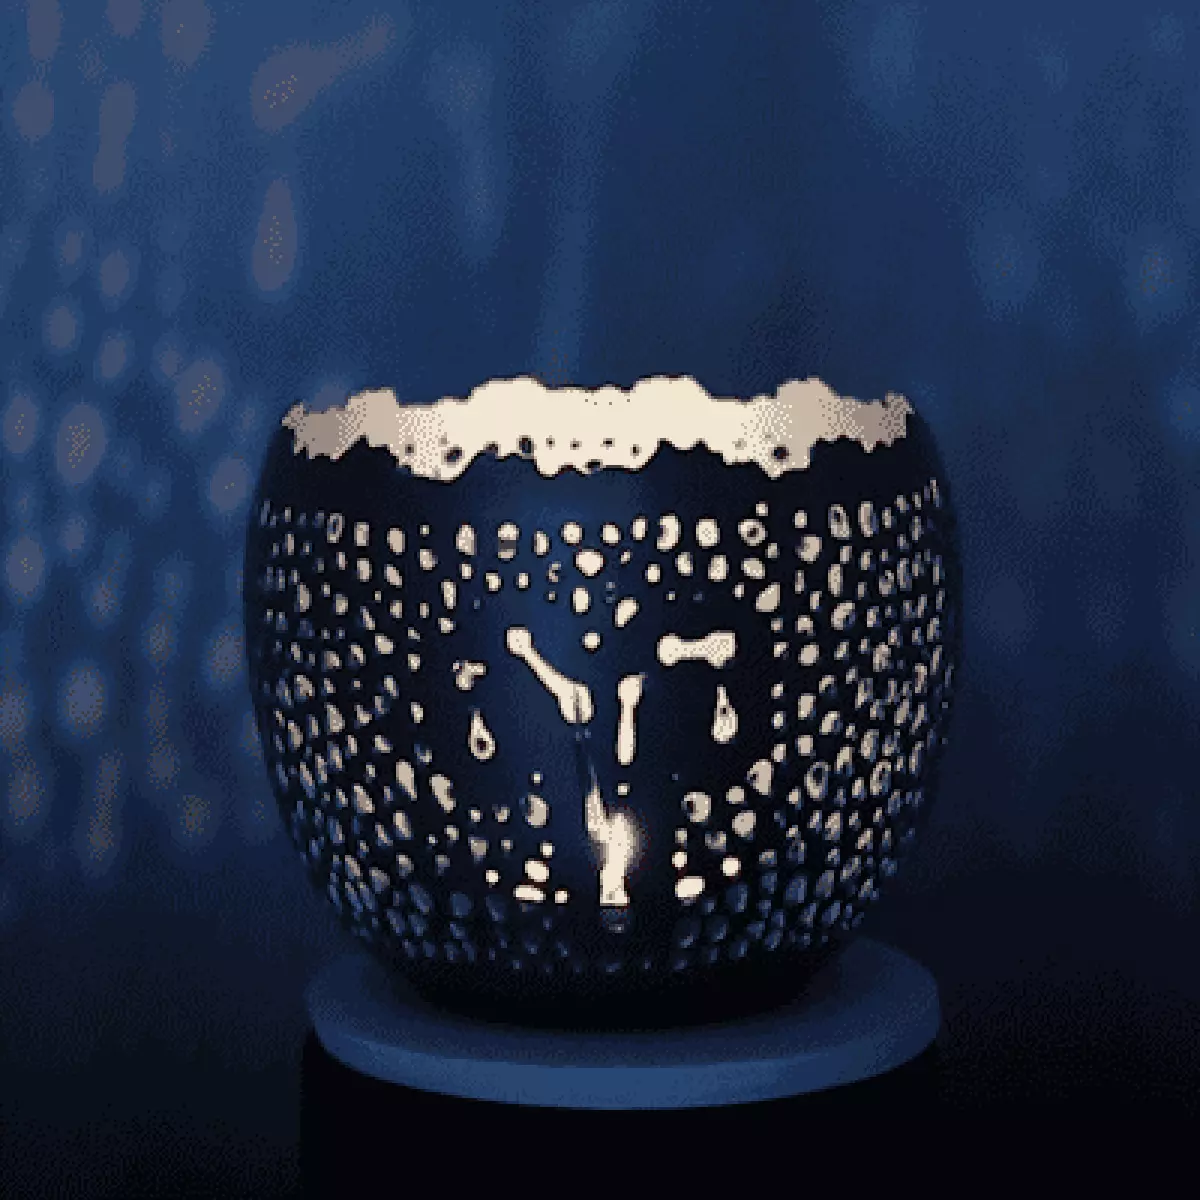 Gif of fair trade, handcrafted Zodiac candleholder with the Aries sign in the punchwork spinning slowly; casting light patterns on the indigo walls around it.